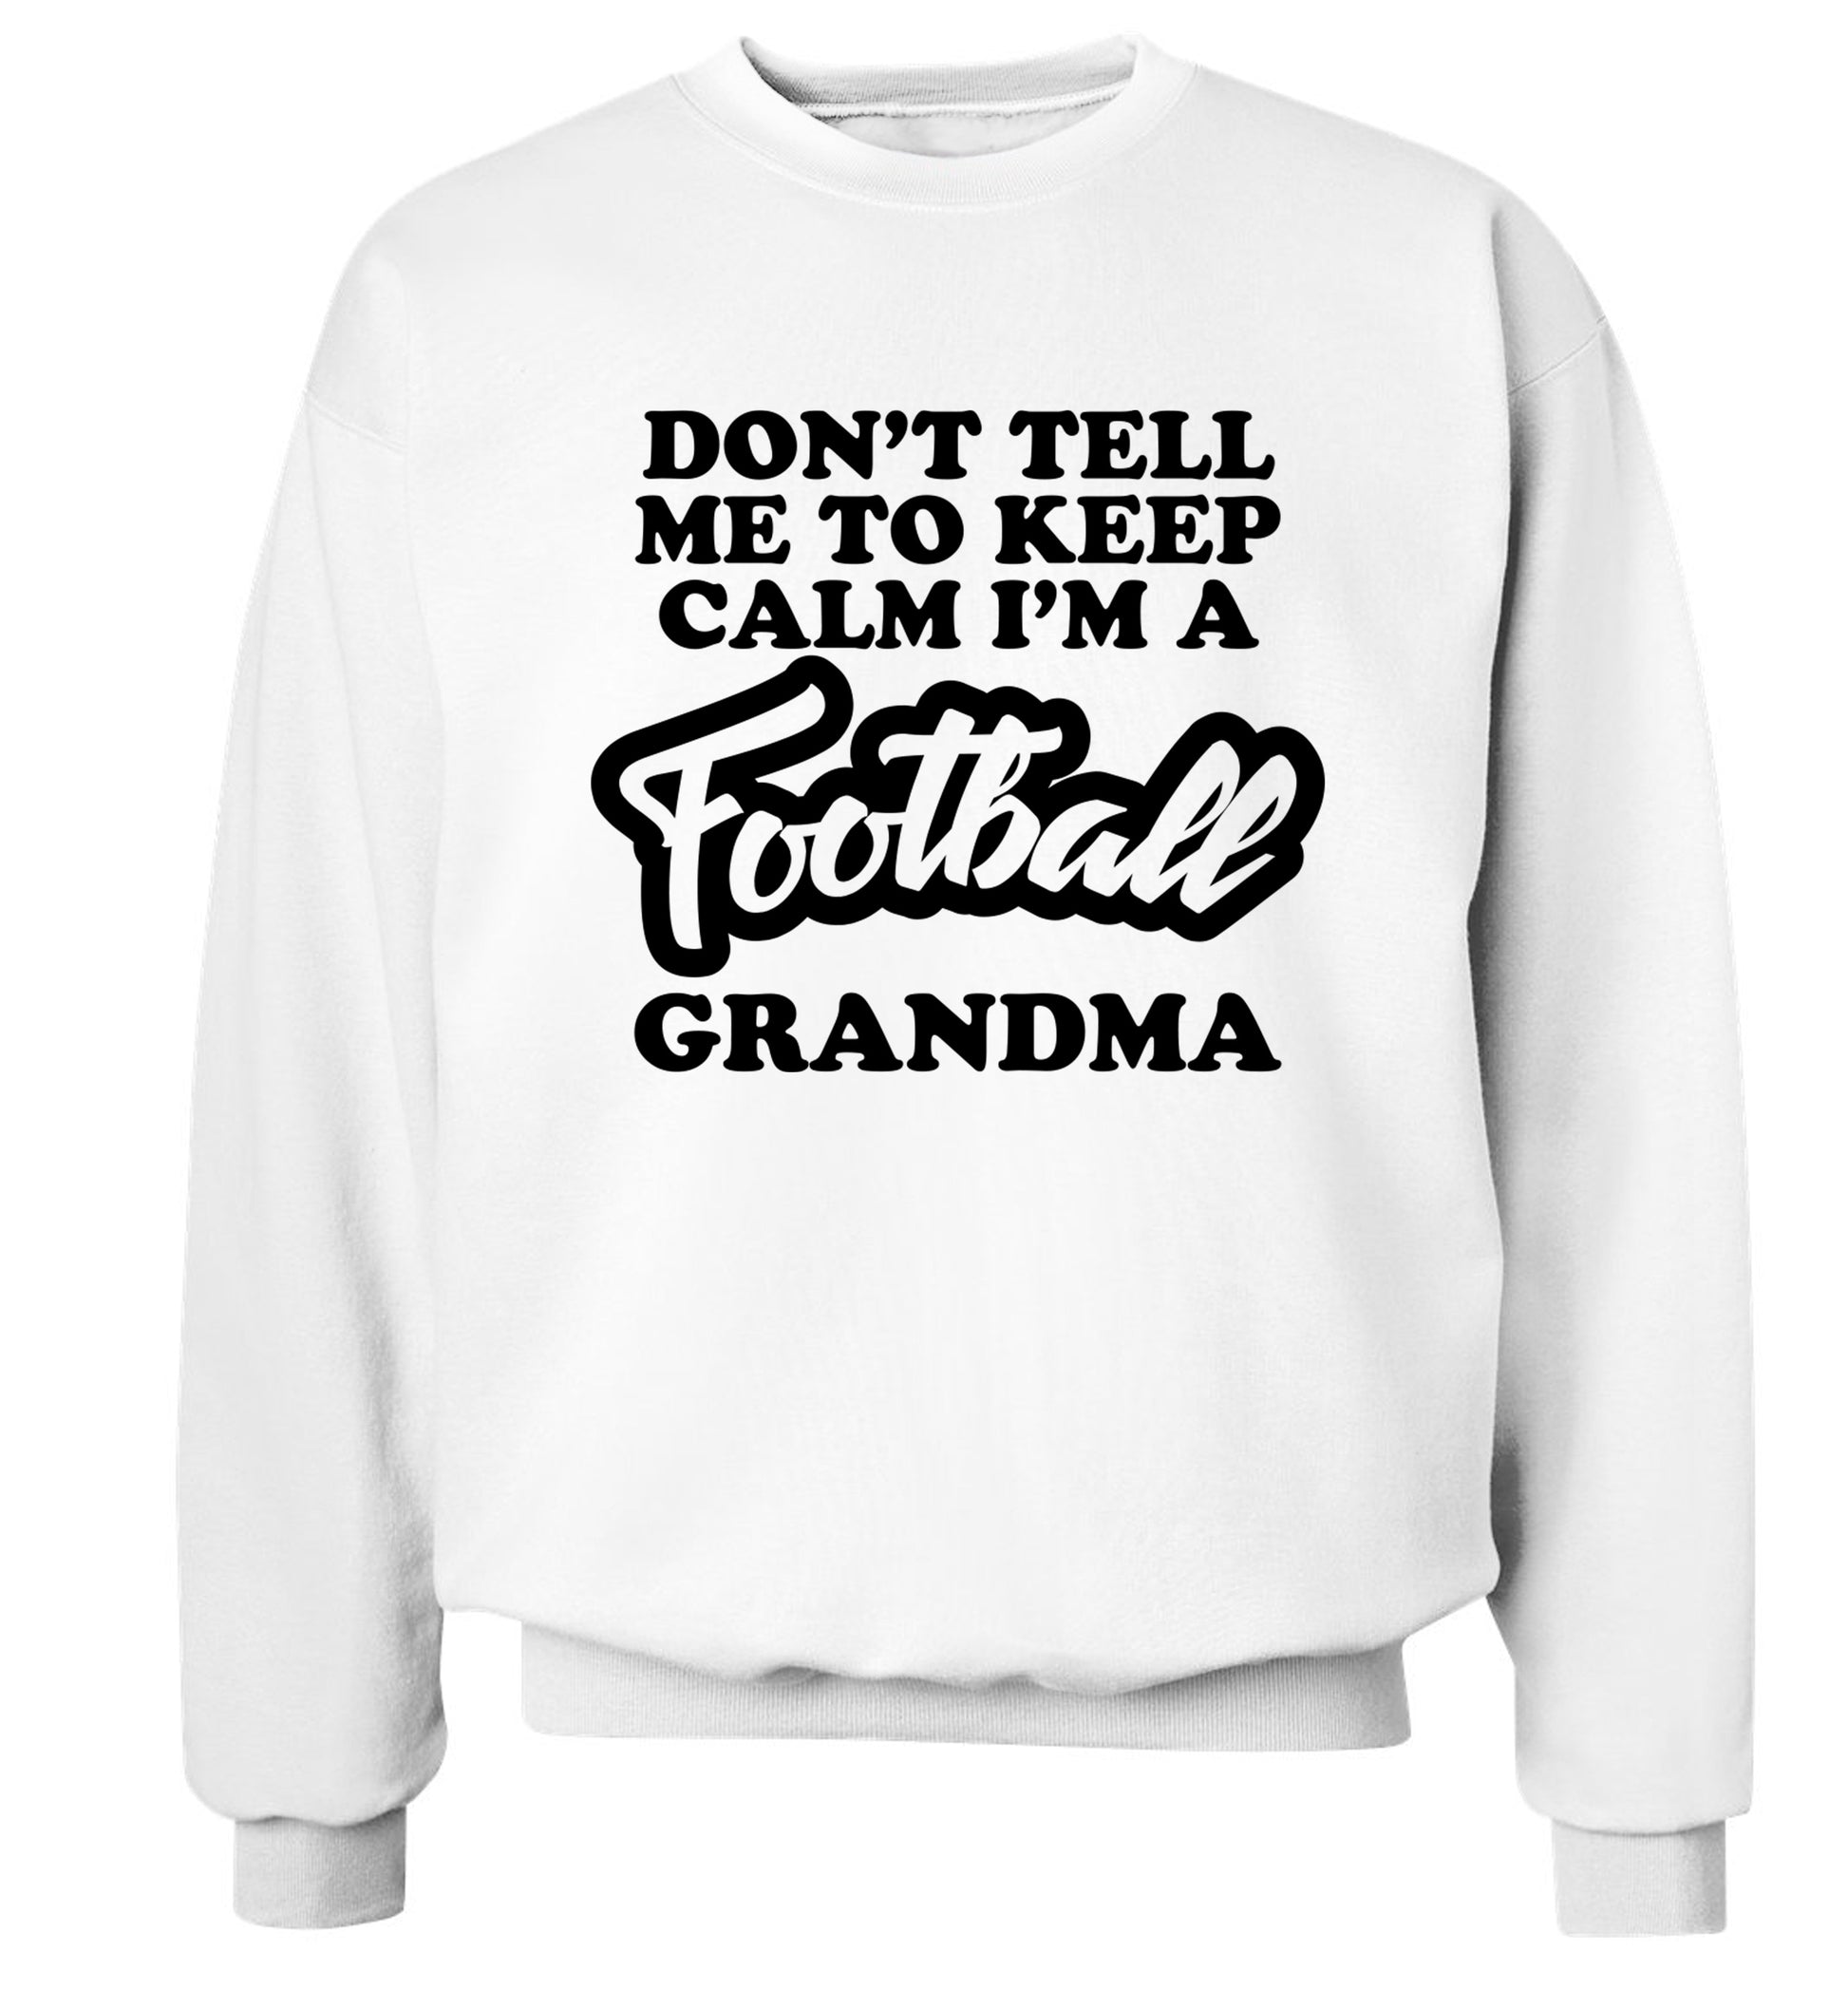 Don't tell me to keep calm I'm a football grandma Adult's unisexwhite Sweater 2XL